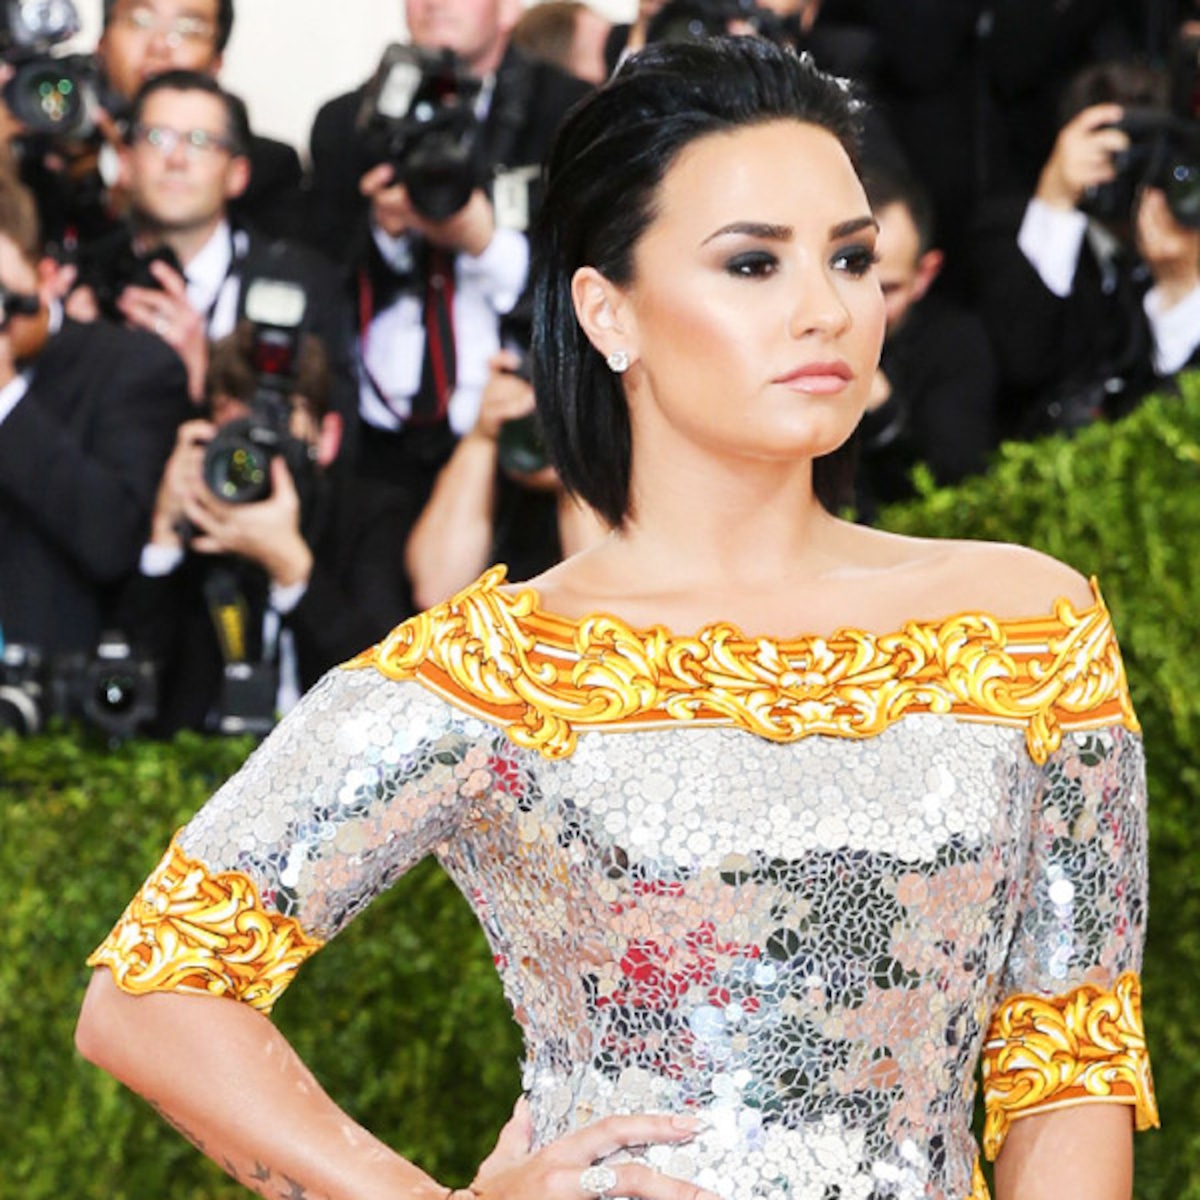 Celebs Who Got Real About The Met Gala - E! Online